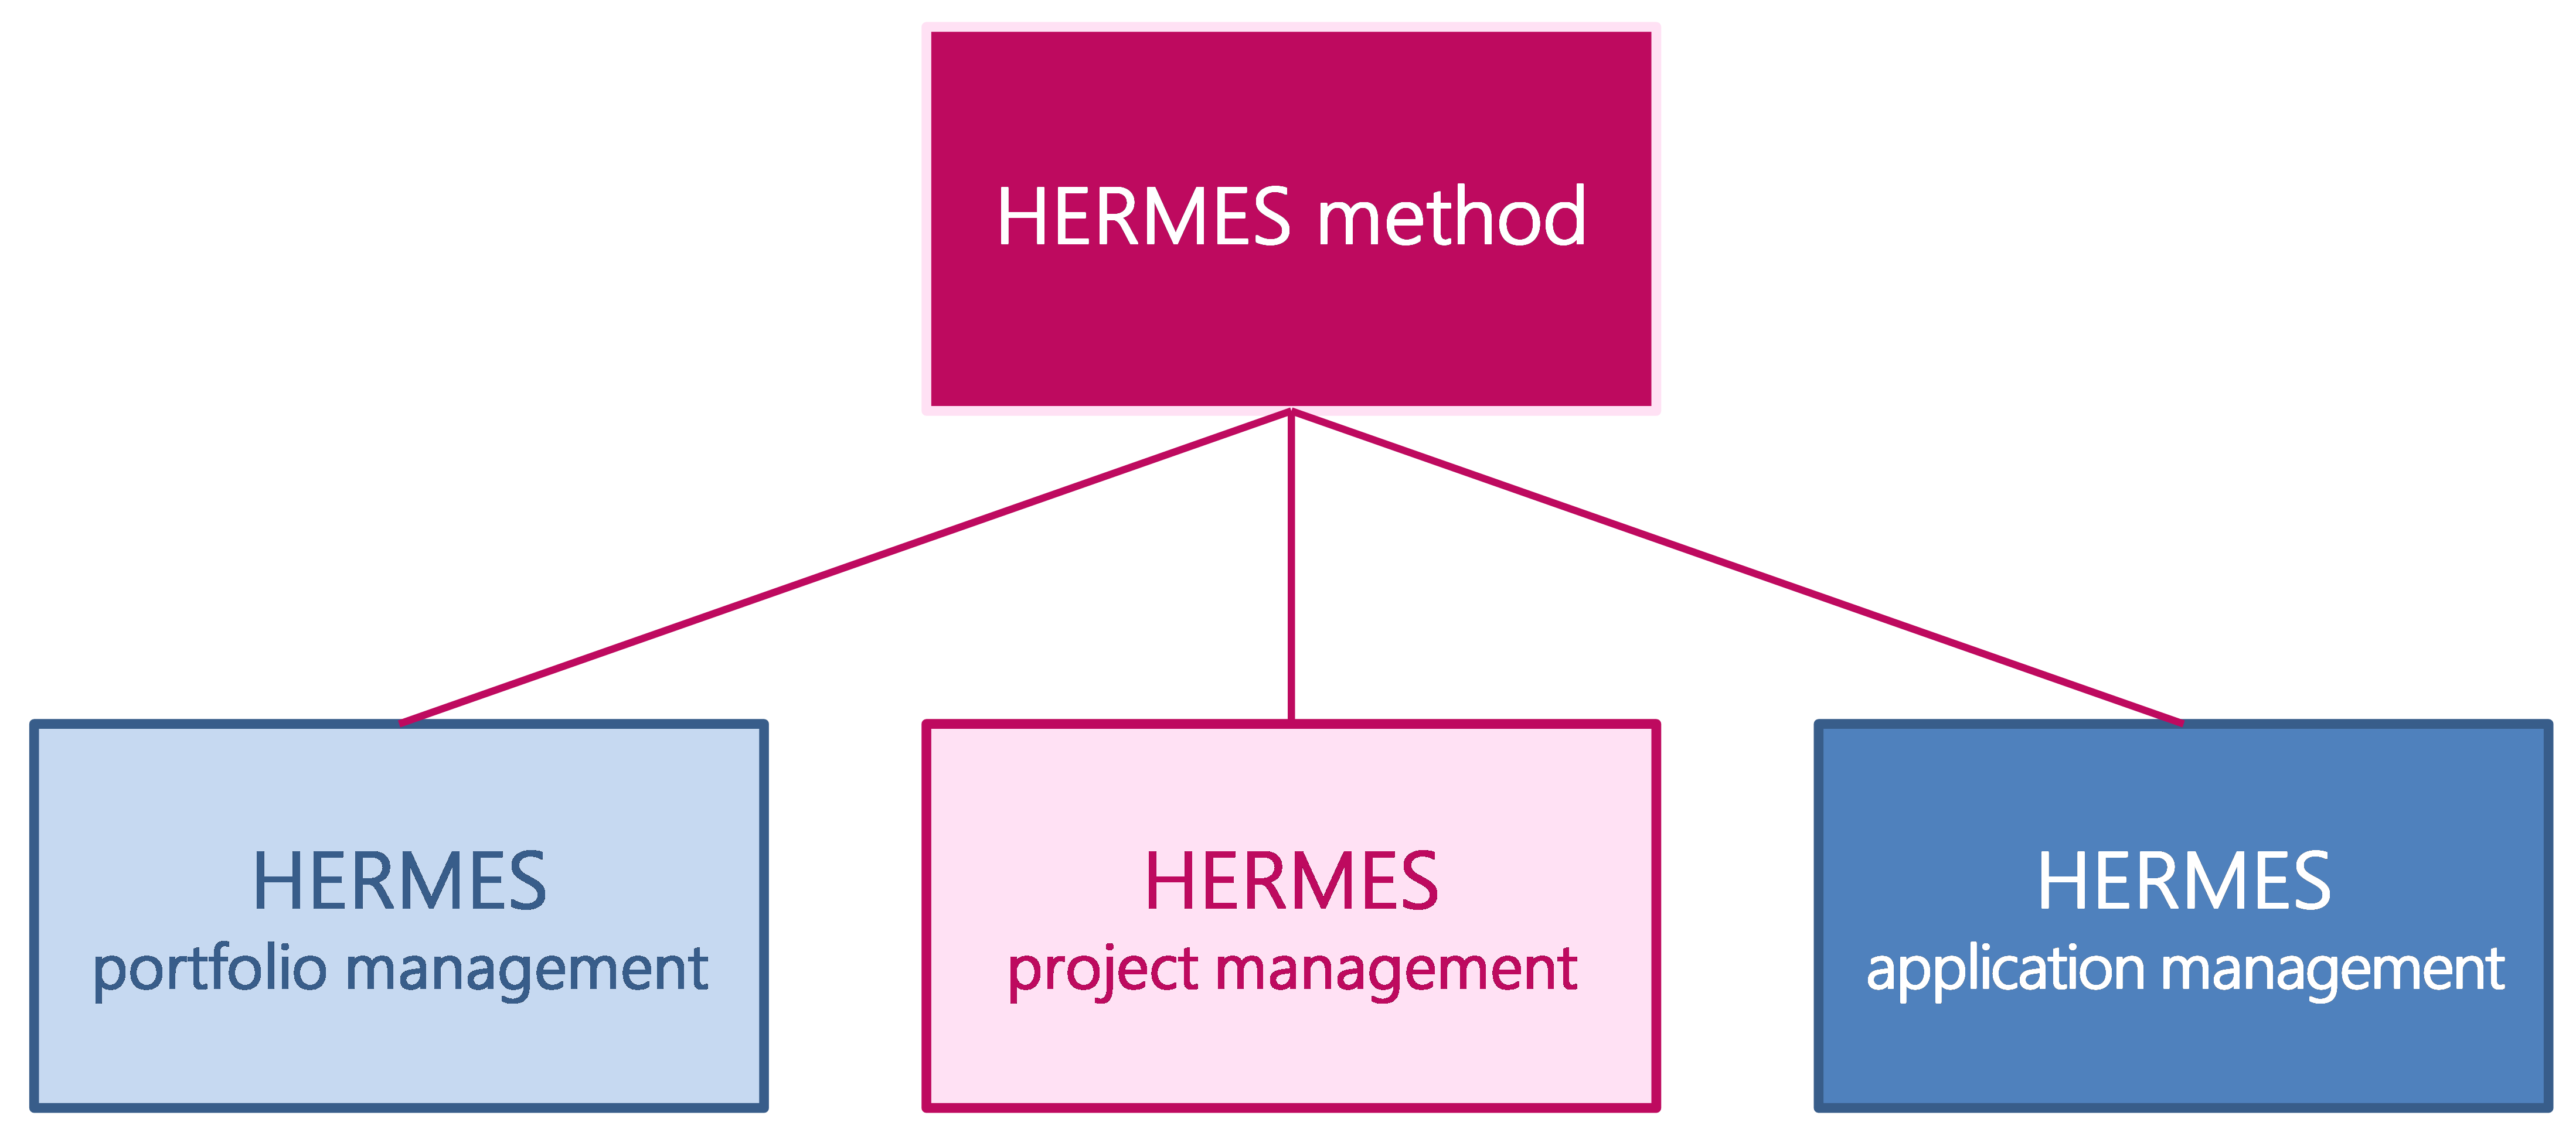 Figure 2: The three top method components of the HERMES method